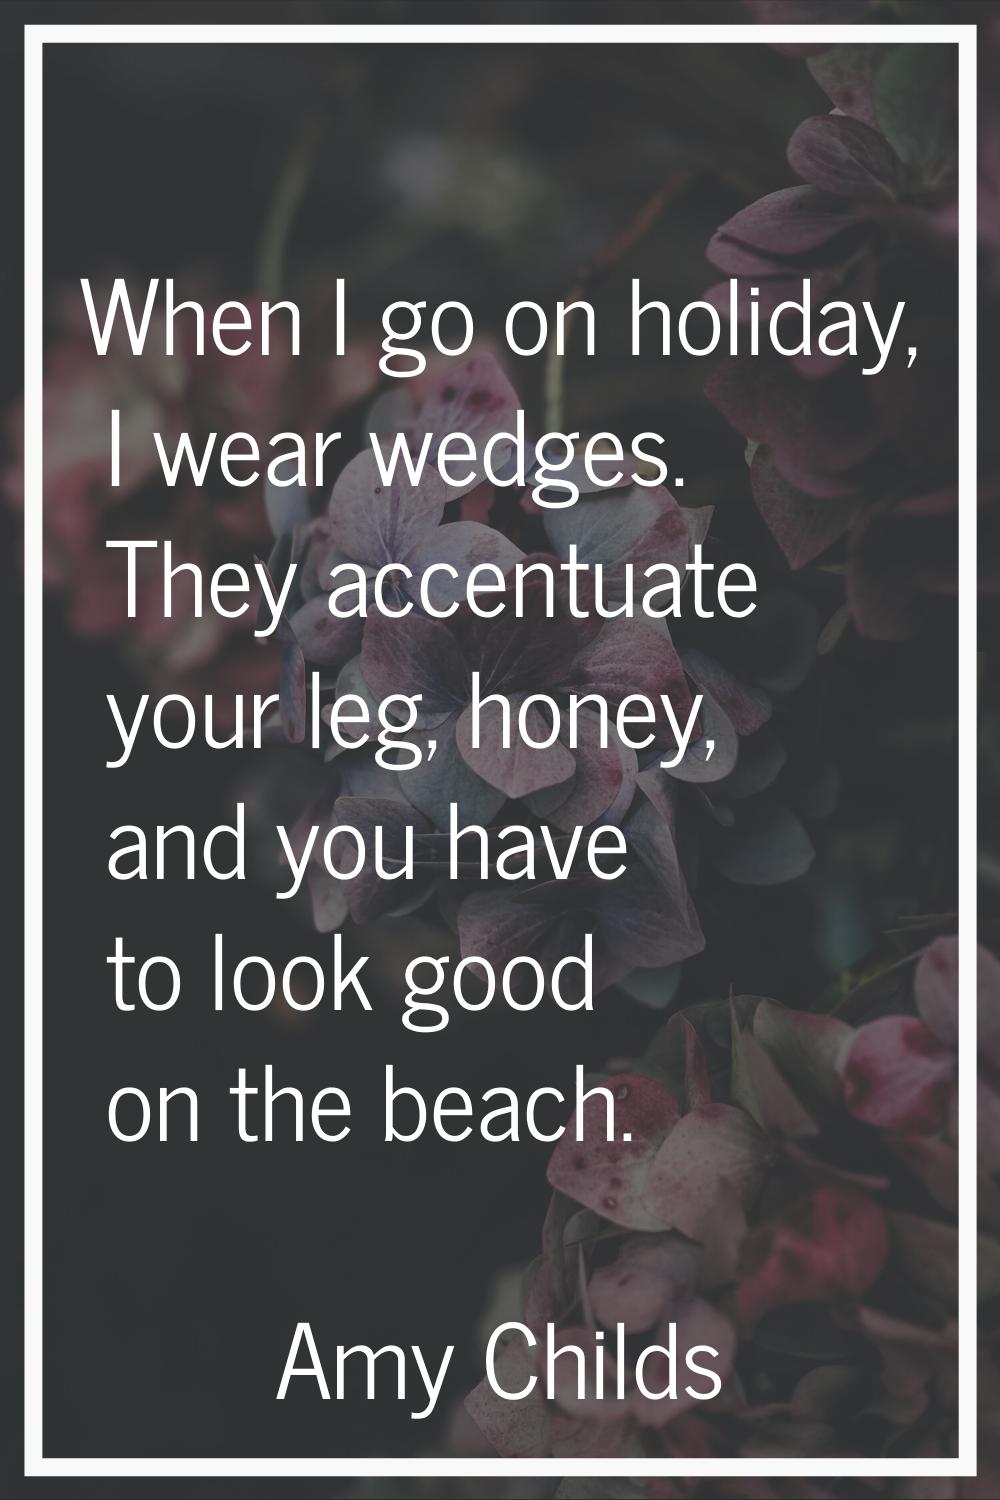 When I go on holiday, I wear wedges. They accentuate your leg, honey, and you have to look good on 